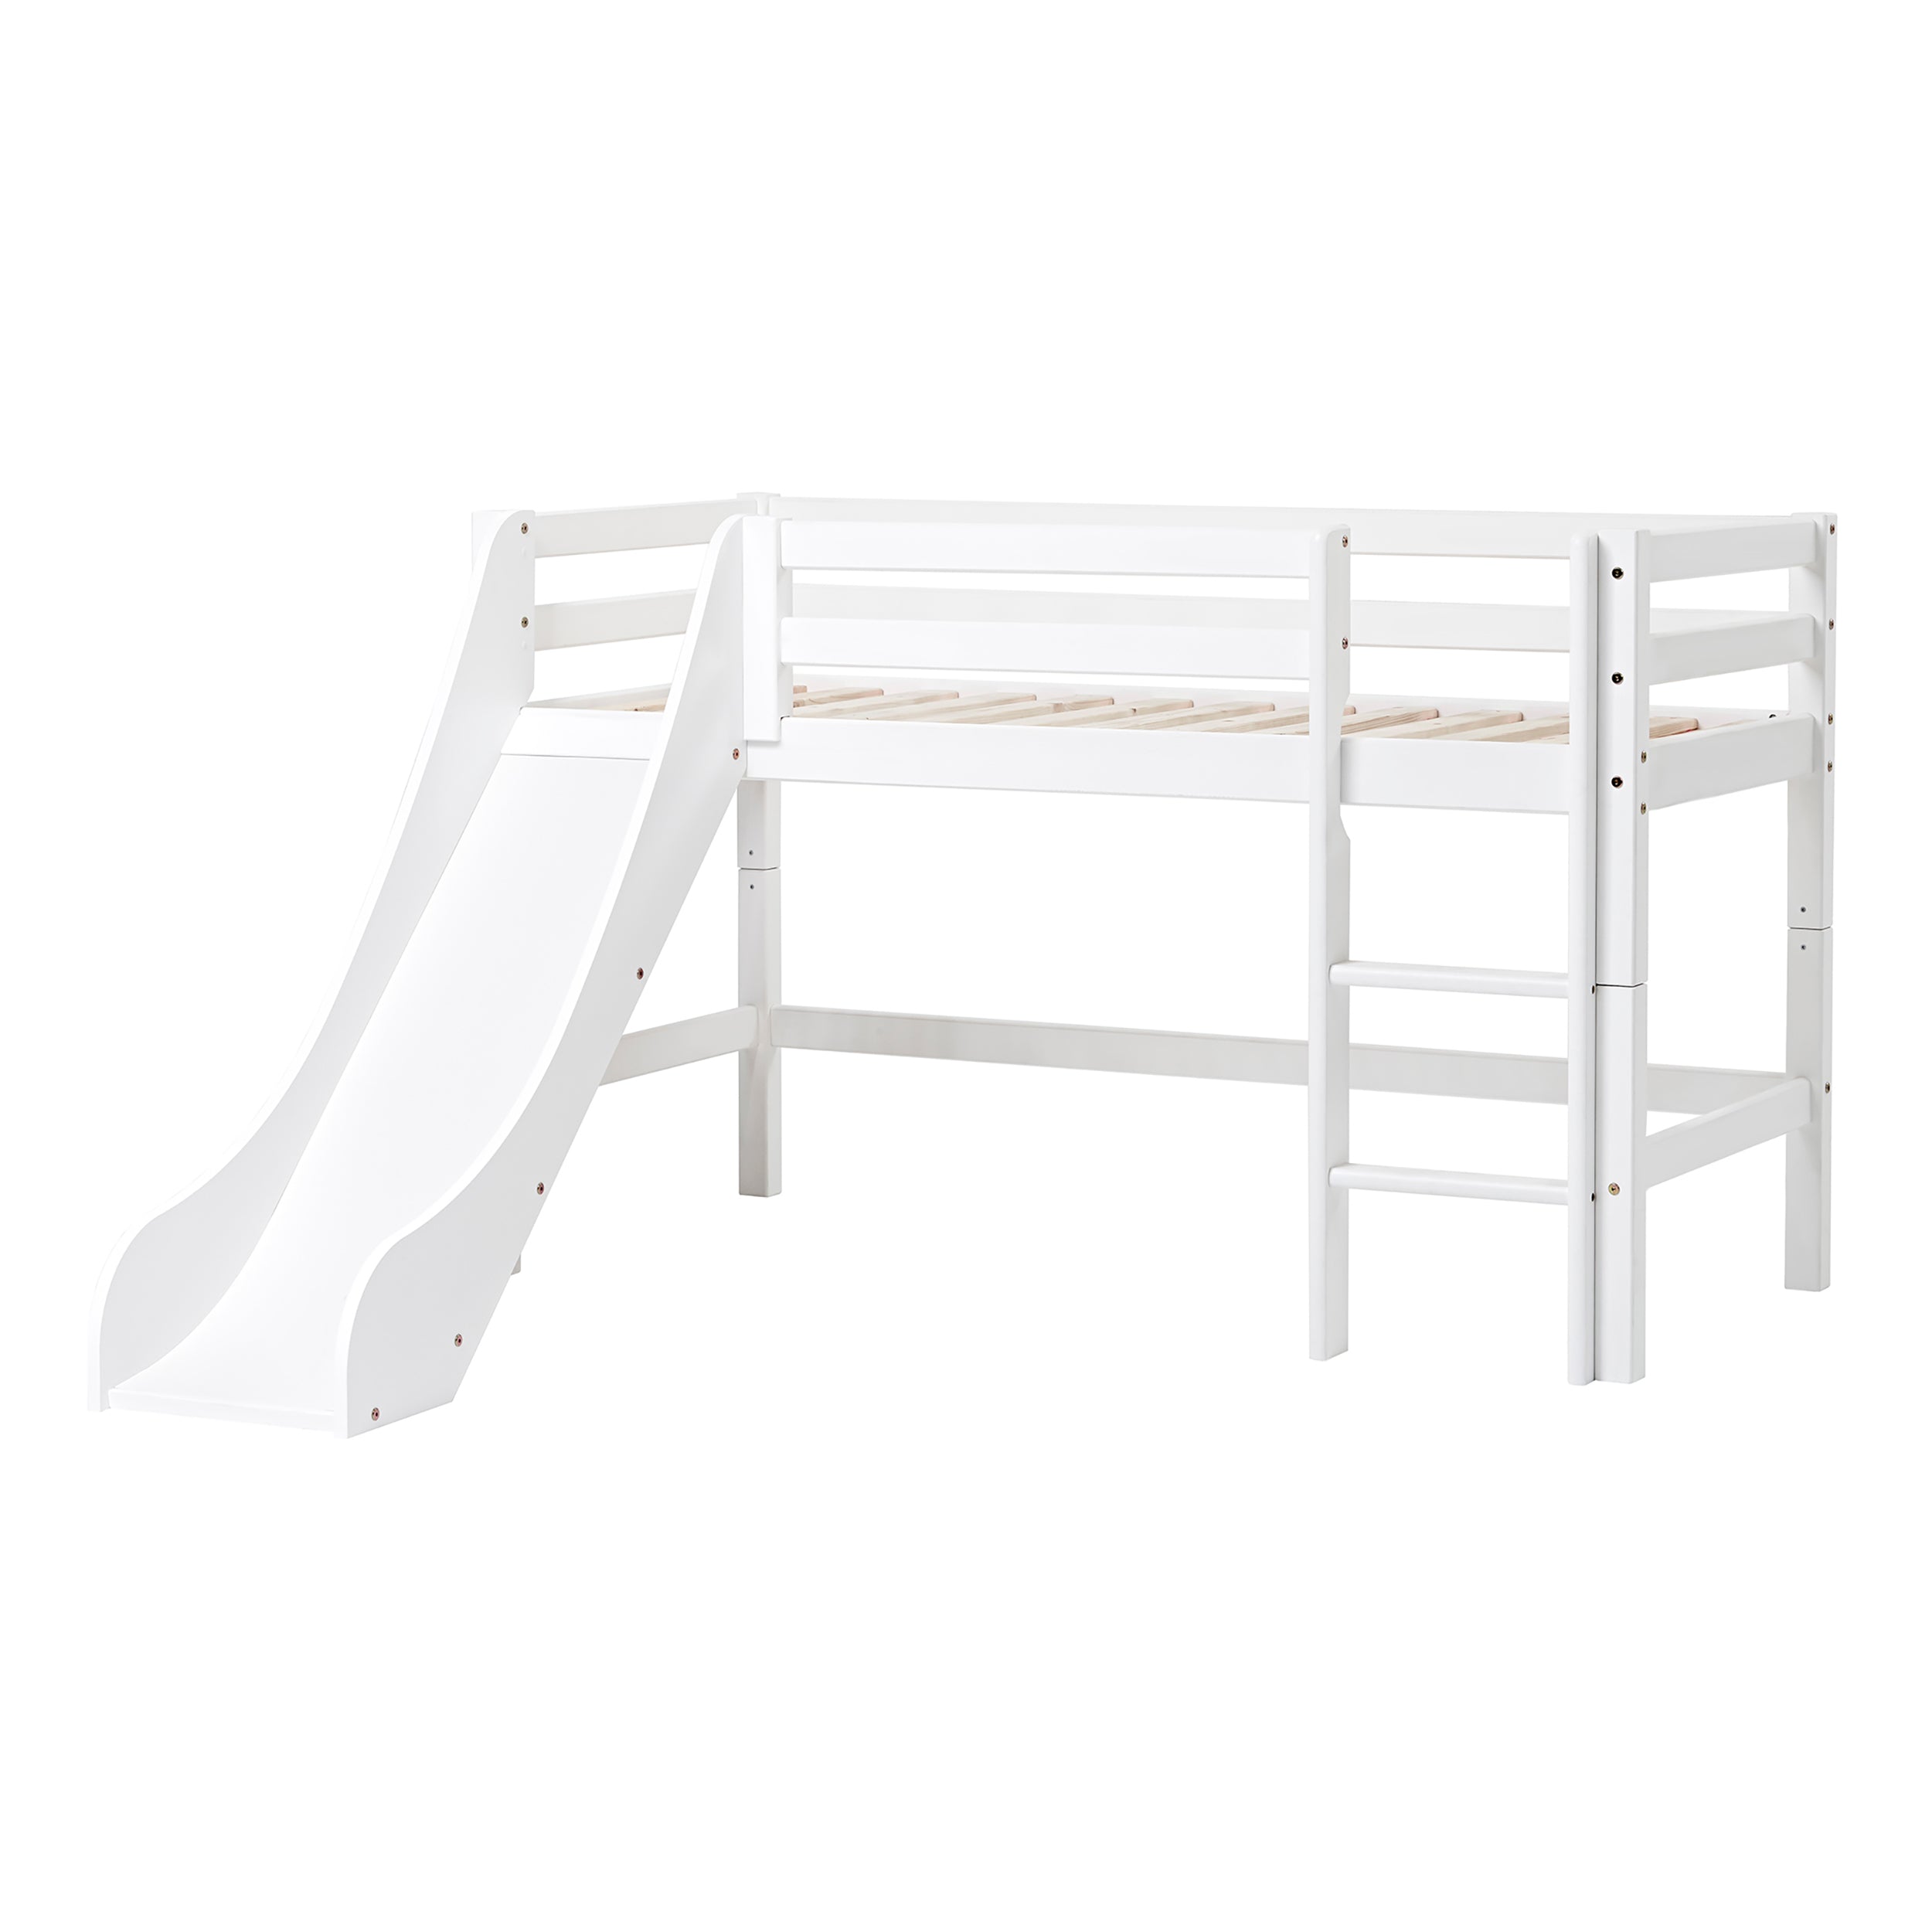 Hoppekids ECO Dream Bed Rail for Mid Sleeper Bed with Slide